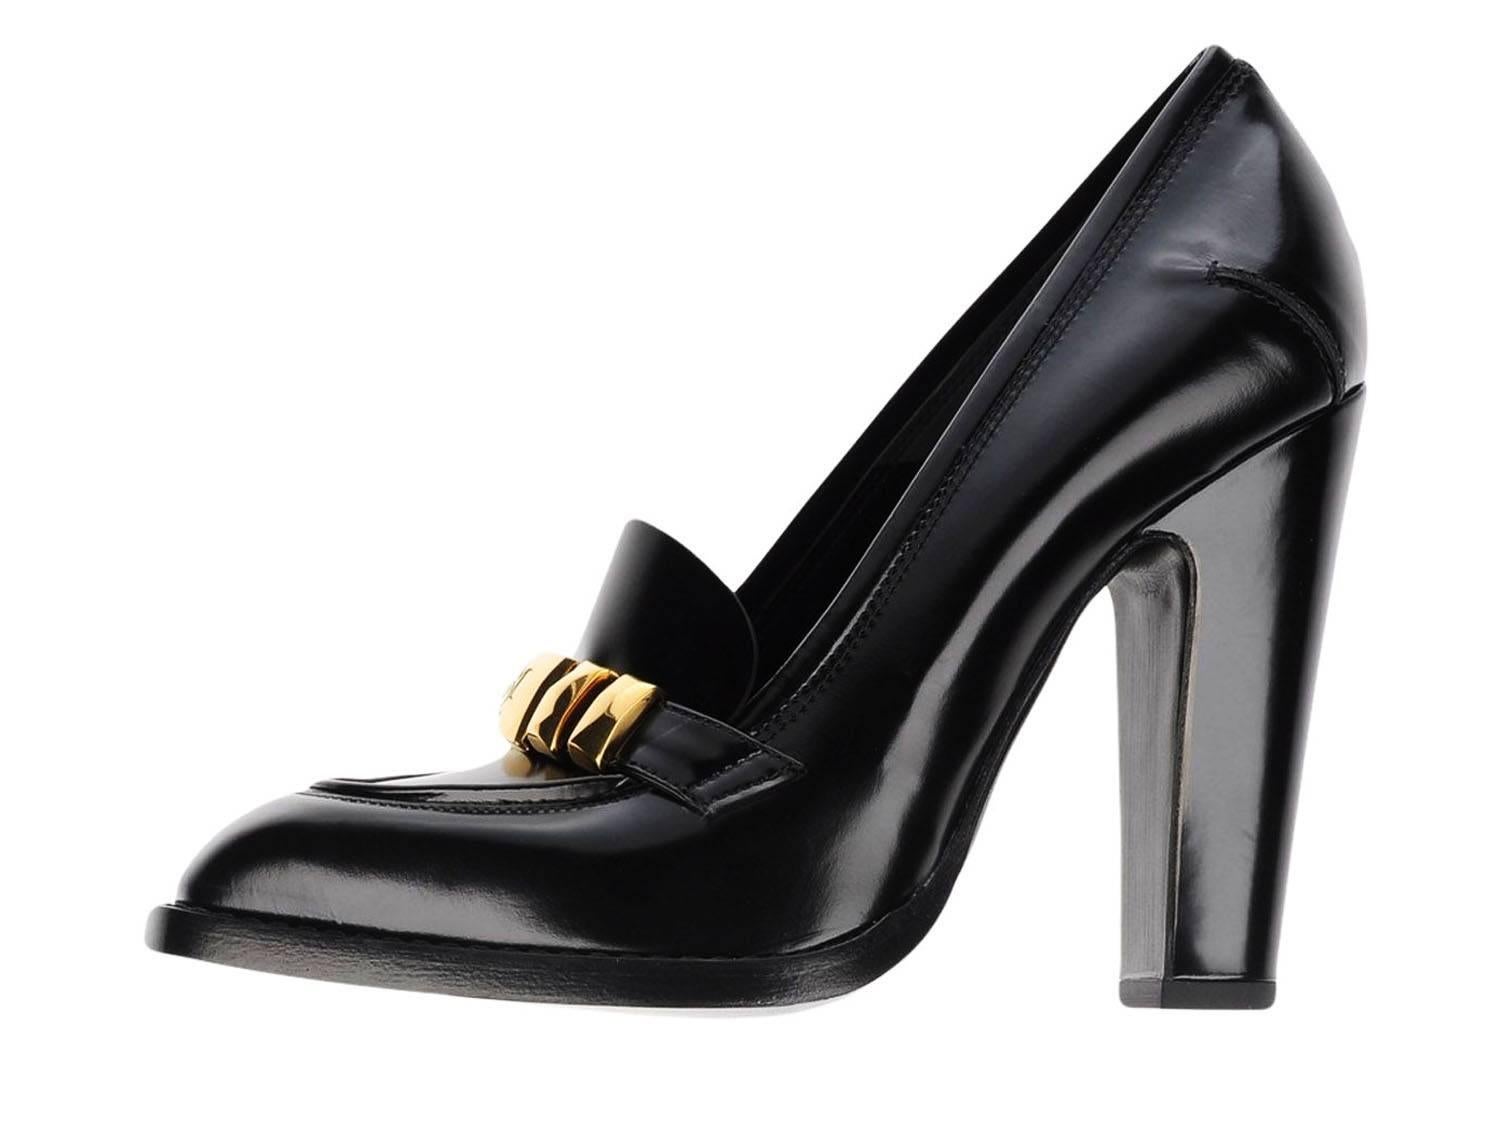 New Alexander McQueen Black Brushed Leather Pumps Heels
Designer sizes available - 36 and 40.
Composition: 100% Calf, Gold colored metal logo detail.
4.5 inches brushed leather covered heel. Stitched welt, Leather Sole and Insole.
Made in Italy.
New